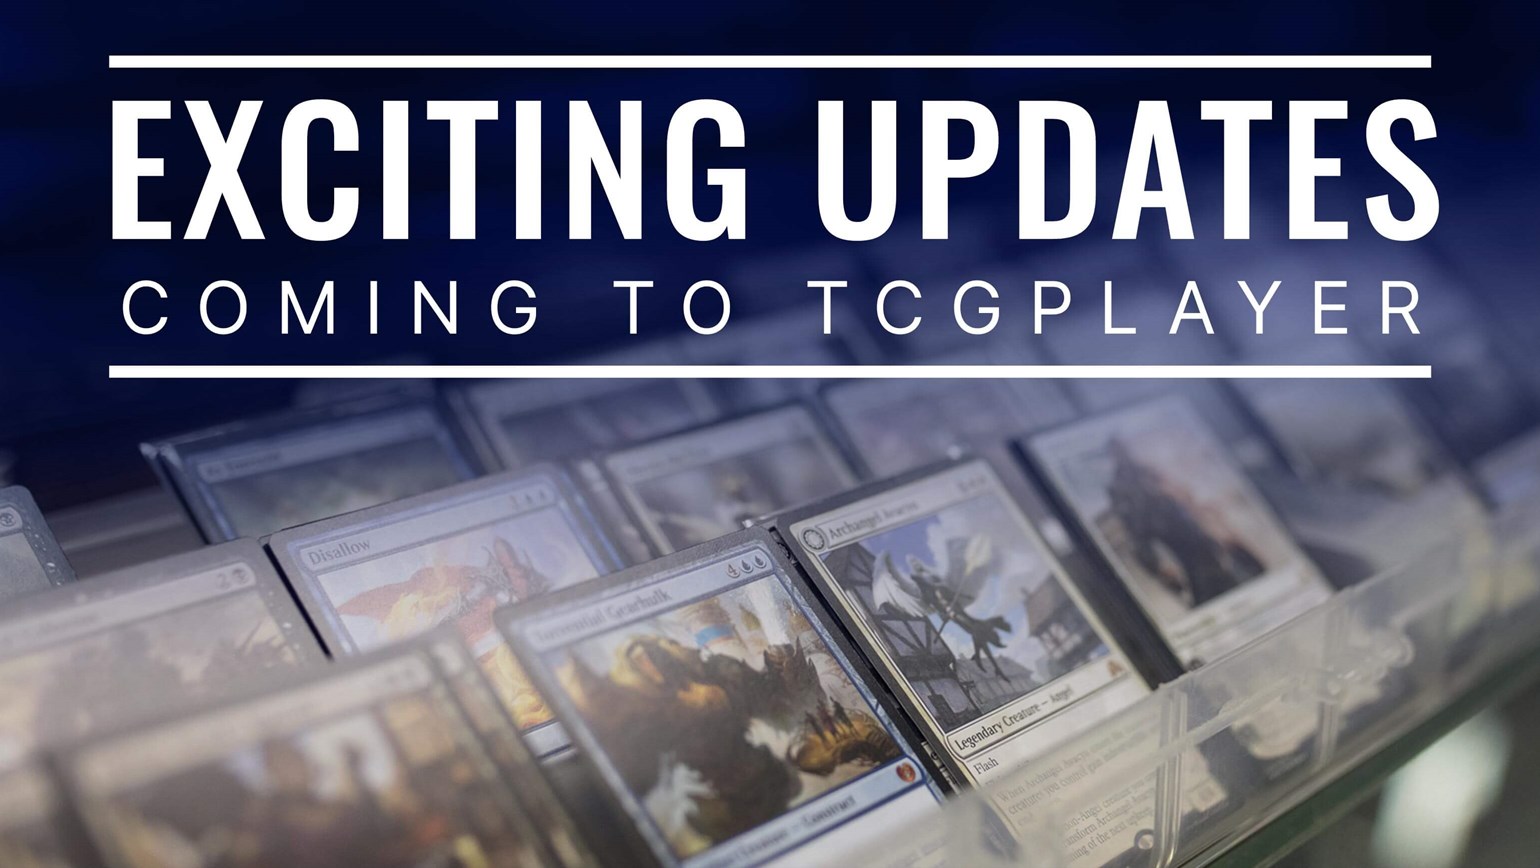 Exciting Updates Coming to TCGplayer